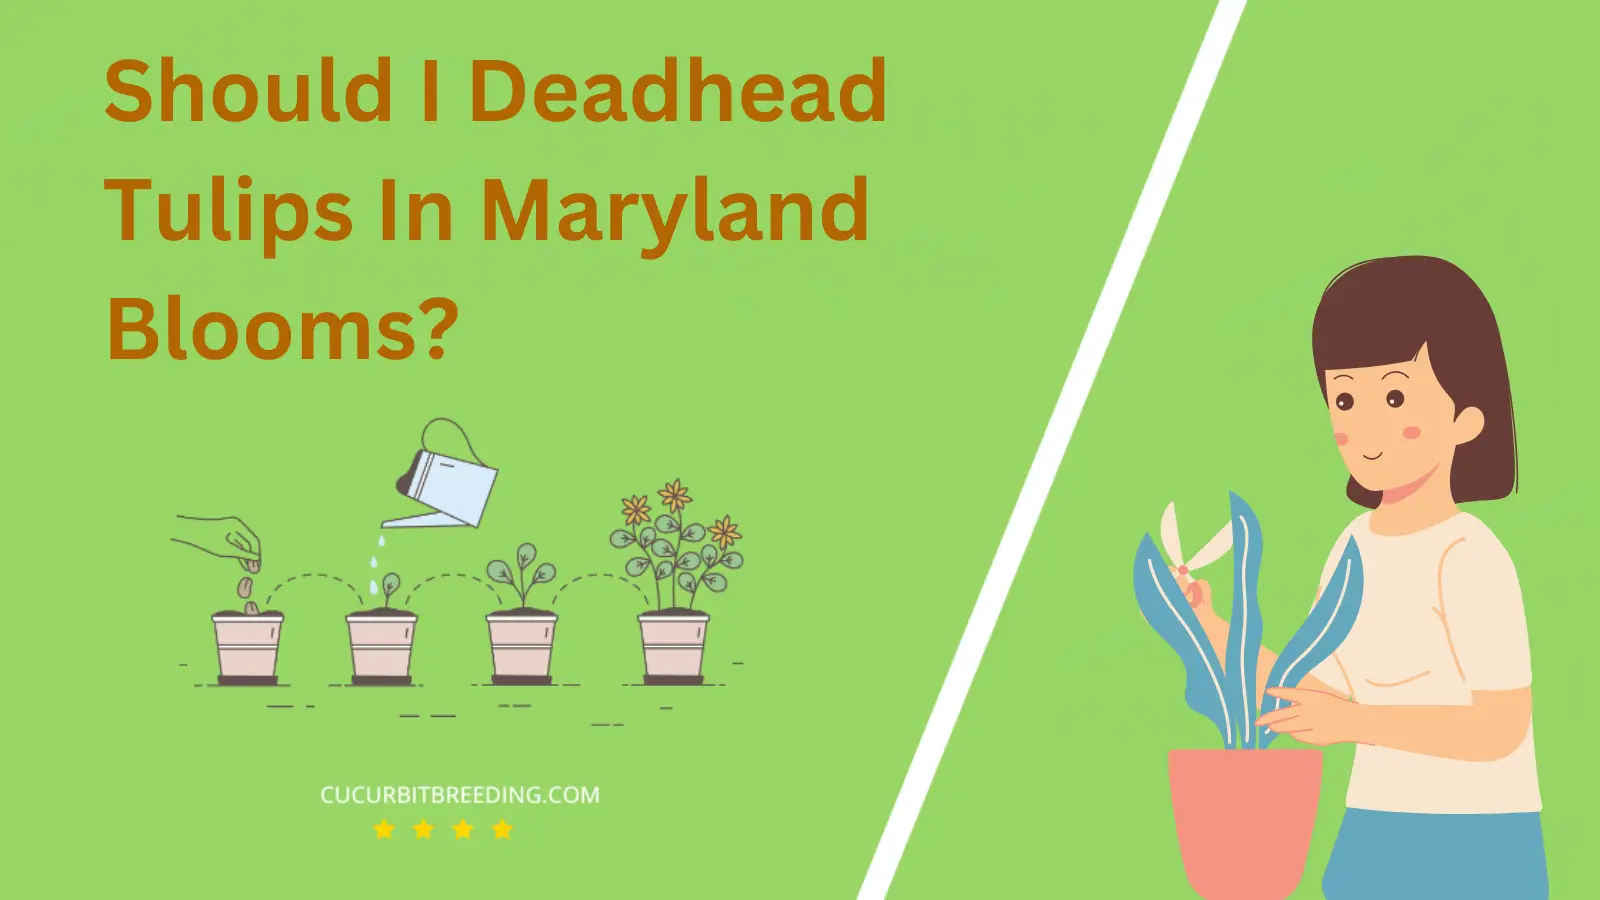 Should I Deadhead Tulips In Maryland Blooms?